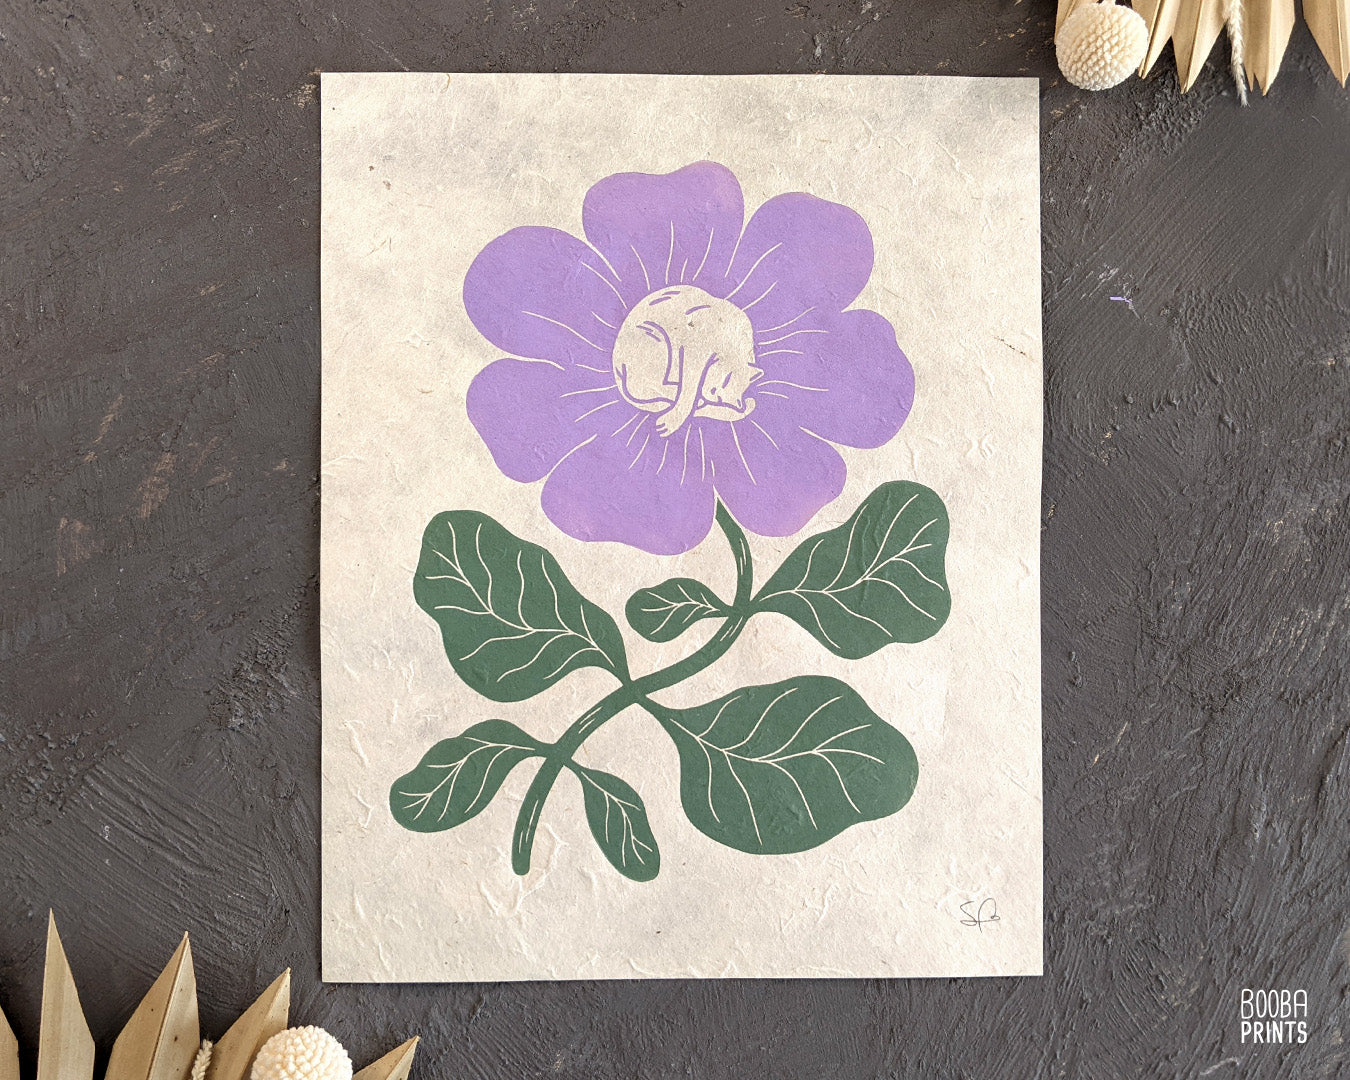 Handmade original linocut print of my Flower Cat design, printed in green and purple/mustard with oil based ink on natural Lokta paper. Gift for cat lover and flower lover. Perfect print for your home decor. Studio decor, cute boho print for home decor by Booba Prints